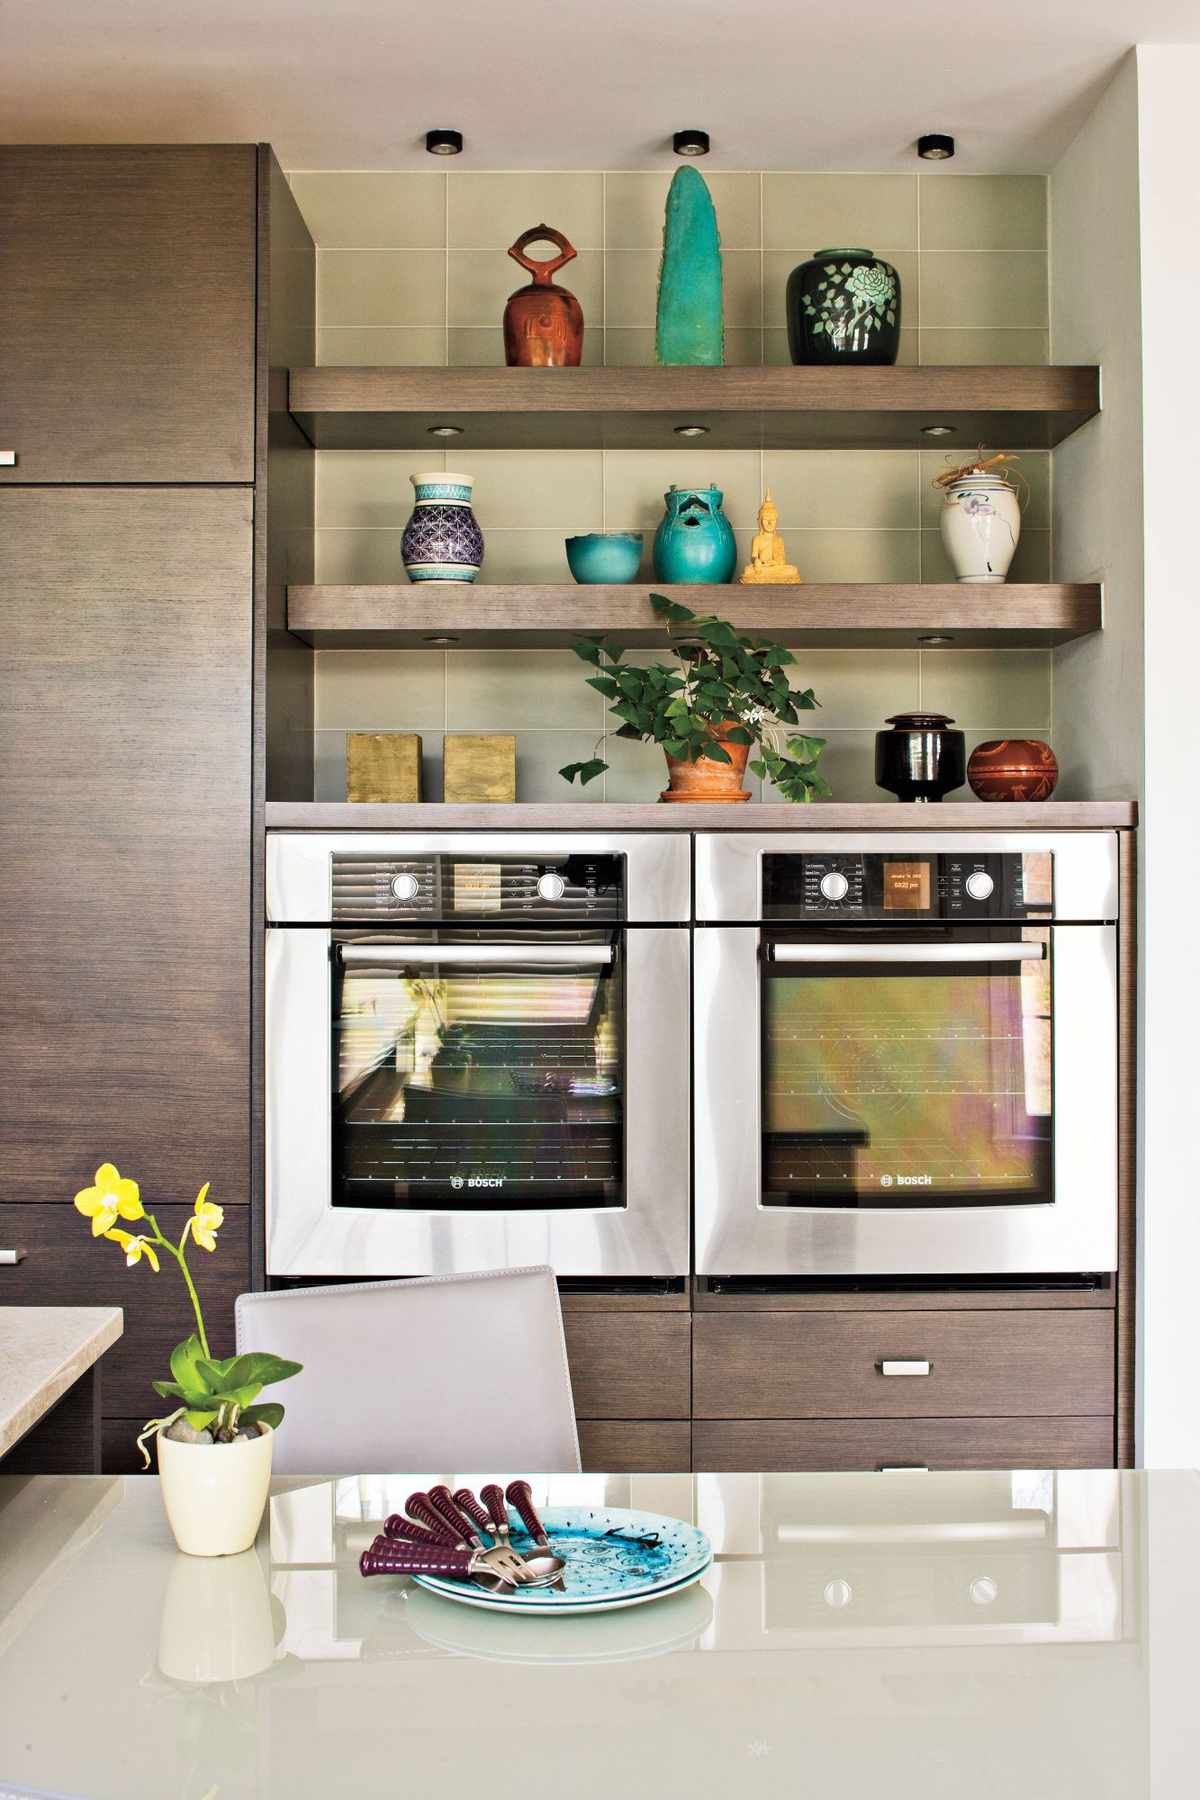 Dream Kitchen Design Ideas: Double the Cooking Space